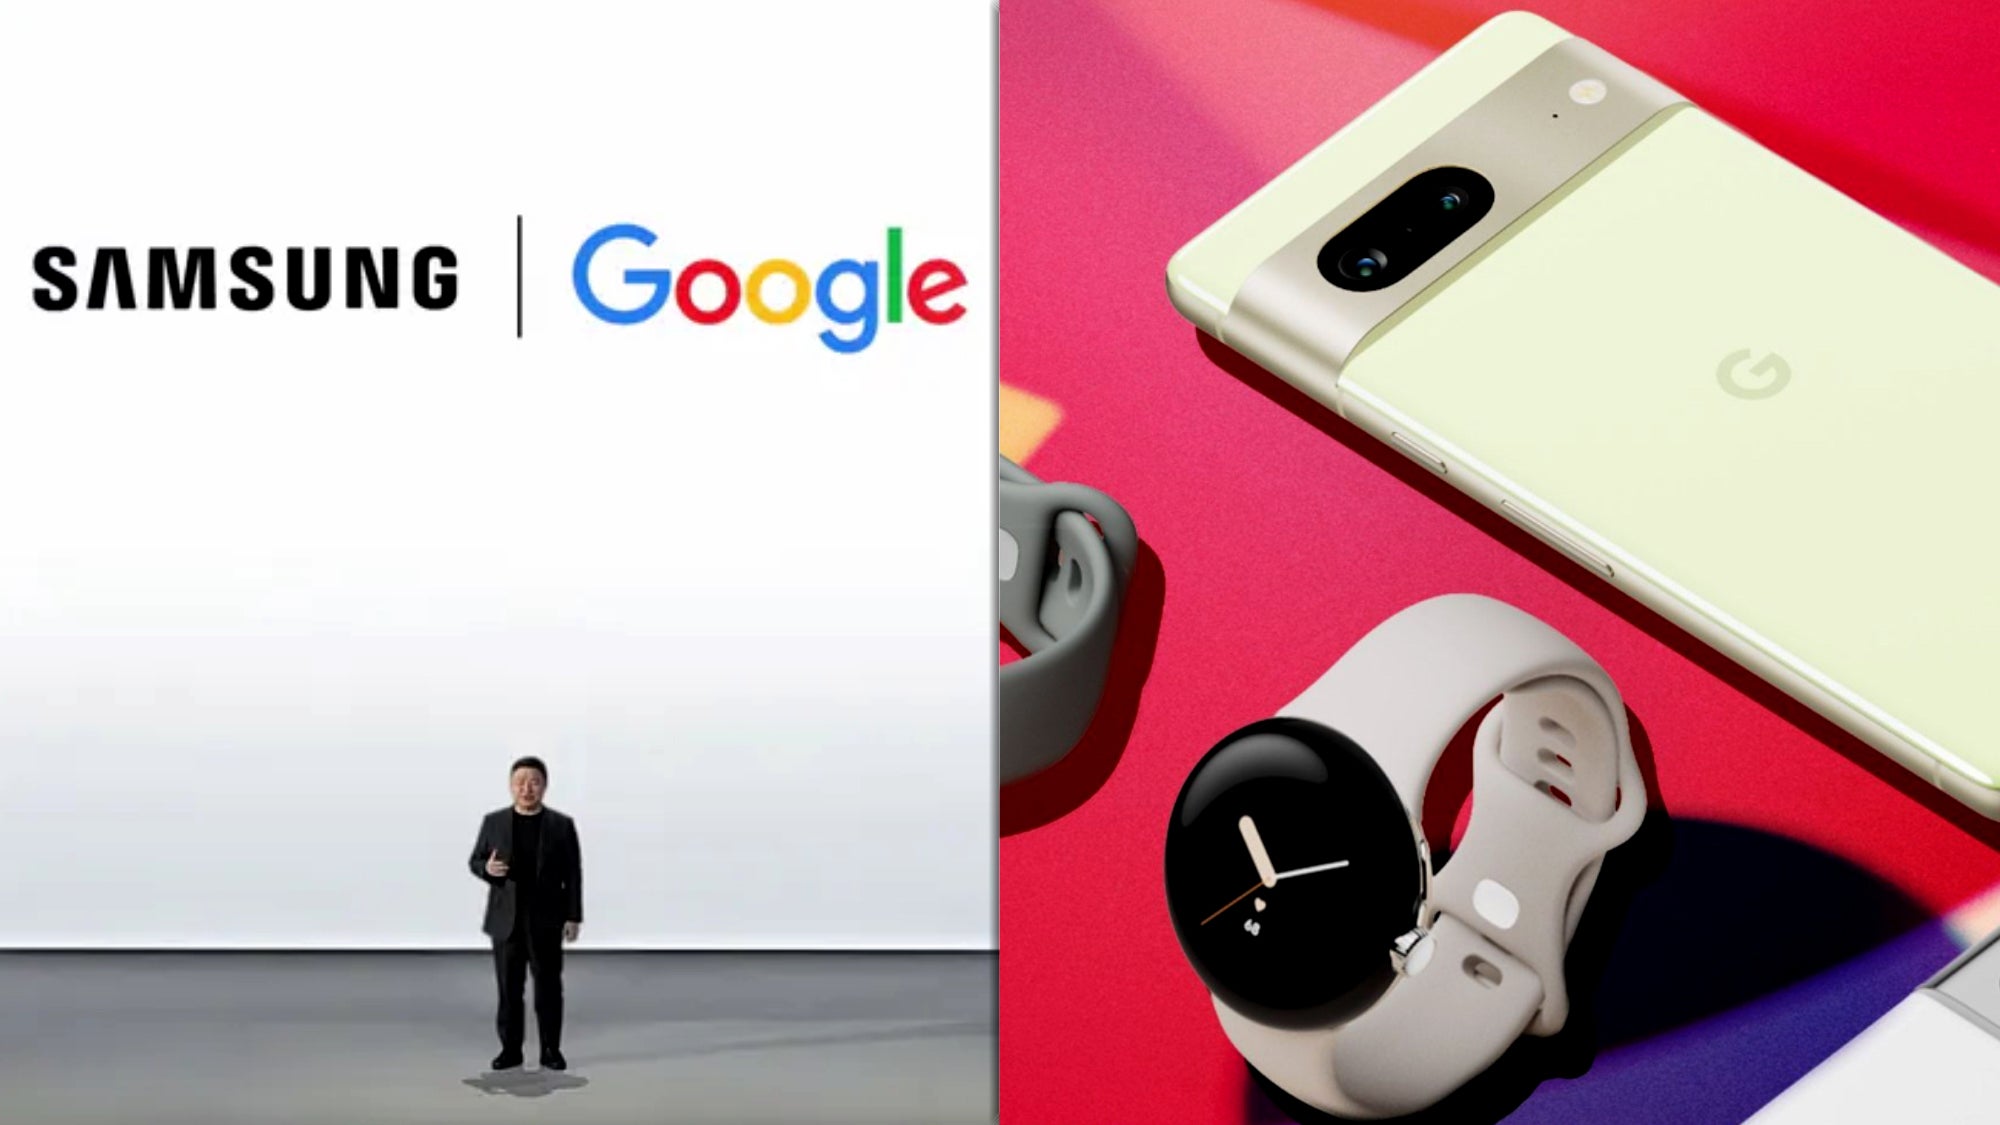 Year after year, Samsung and Google’s partnership is getting suspiciously more favorable for each side. - Dear US and EU tech police, Apple isn’t the only “bad guy” on the smartphone market